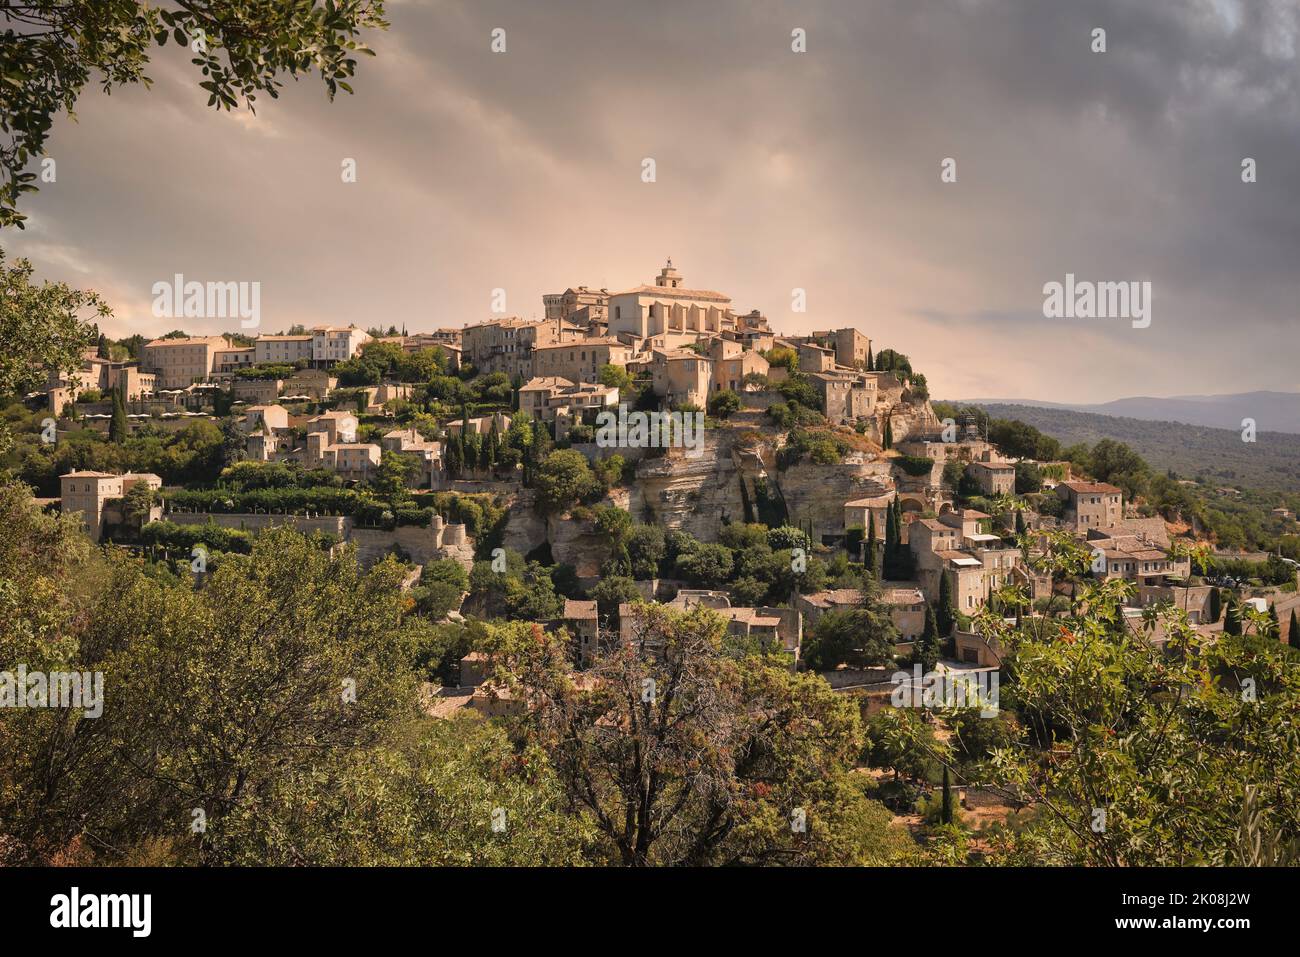 Historic village of Gordes, département Vaucluse in the Provence-Alpes-Côte d'Azur region in southern France. Luberon Valley, heart of the Provence. Stock Photo